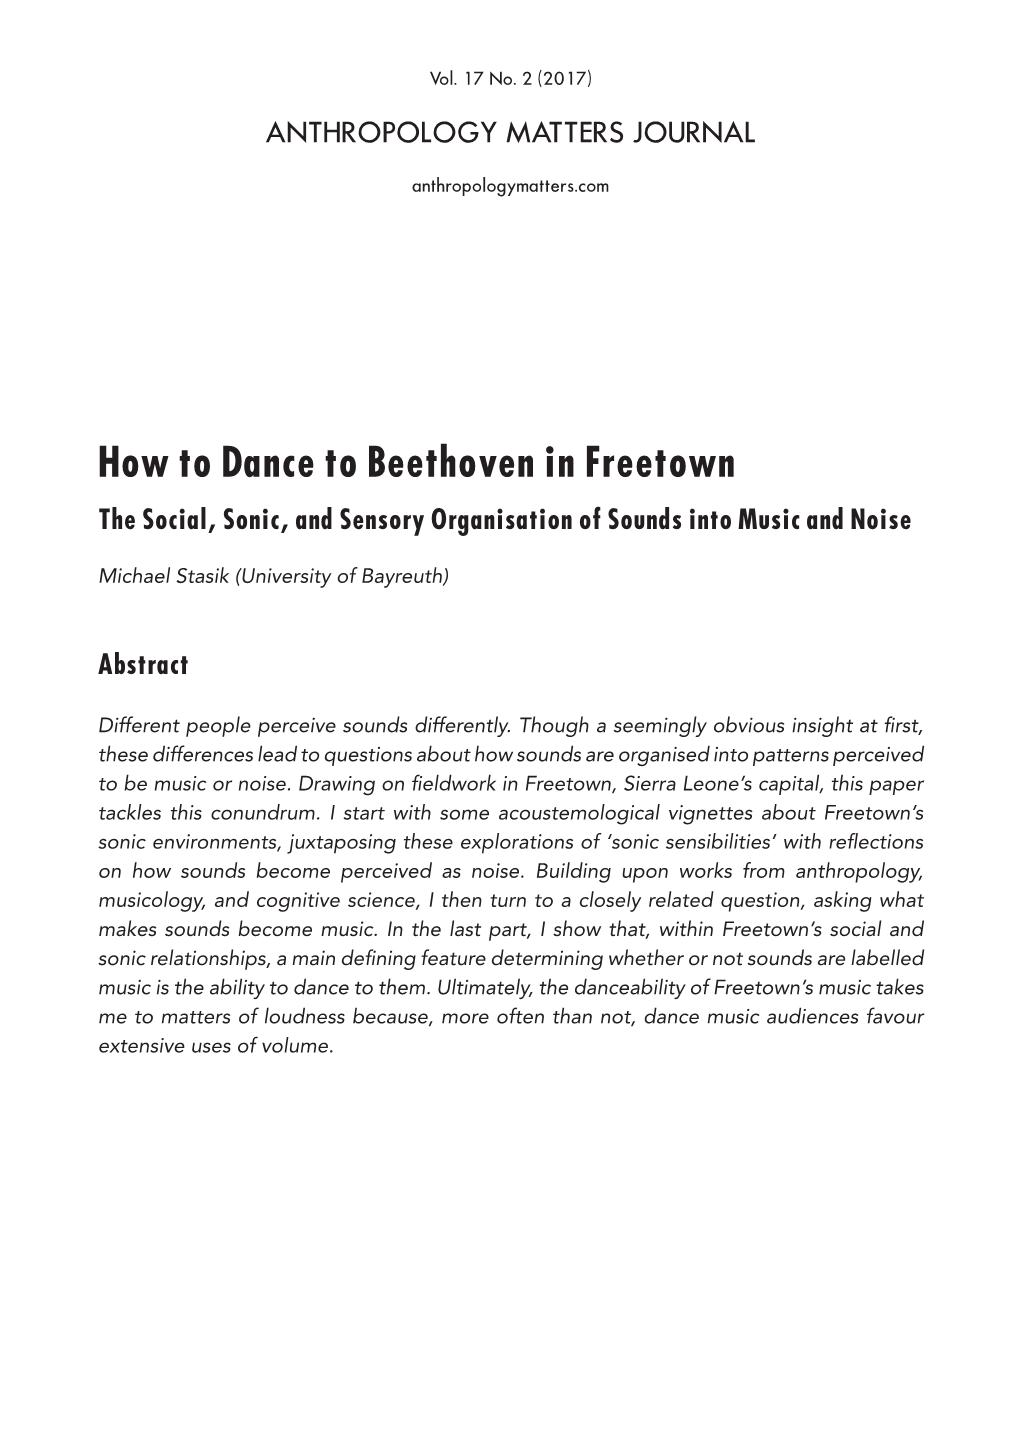 How to Dance to Beethoven in Freetown the Social, Sonic, and Sensory Organisation of Sounds Into Music and Noise